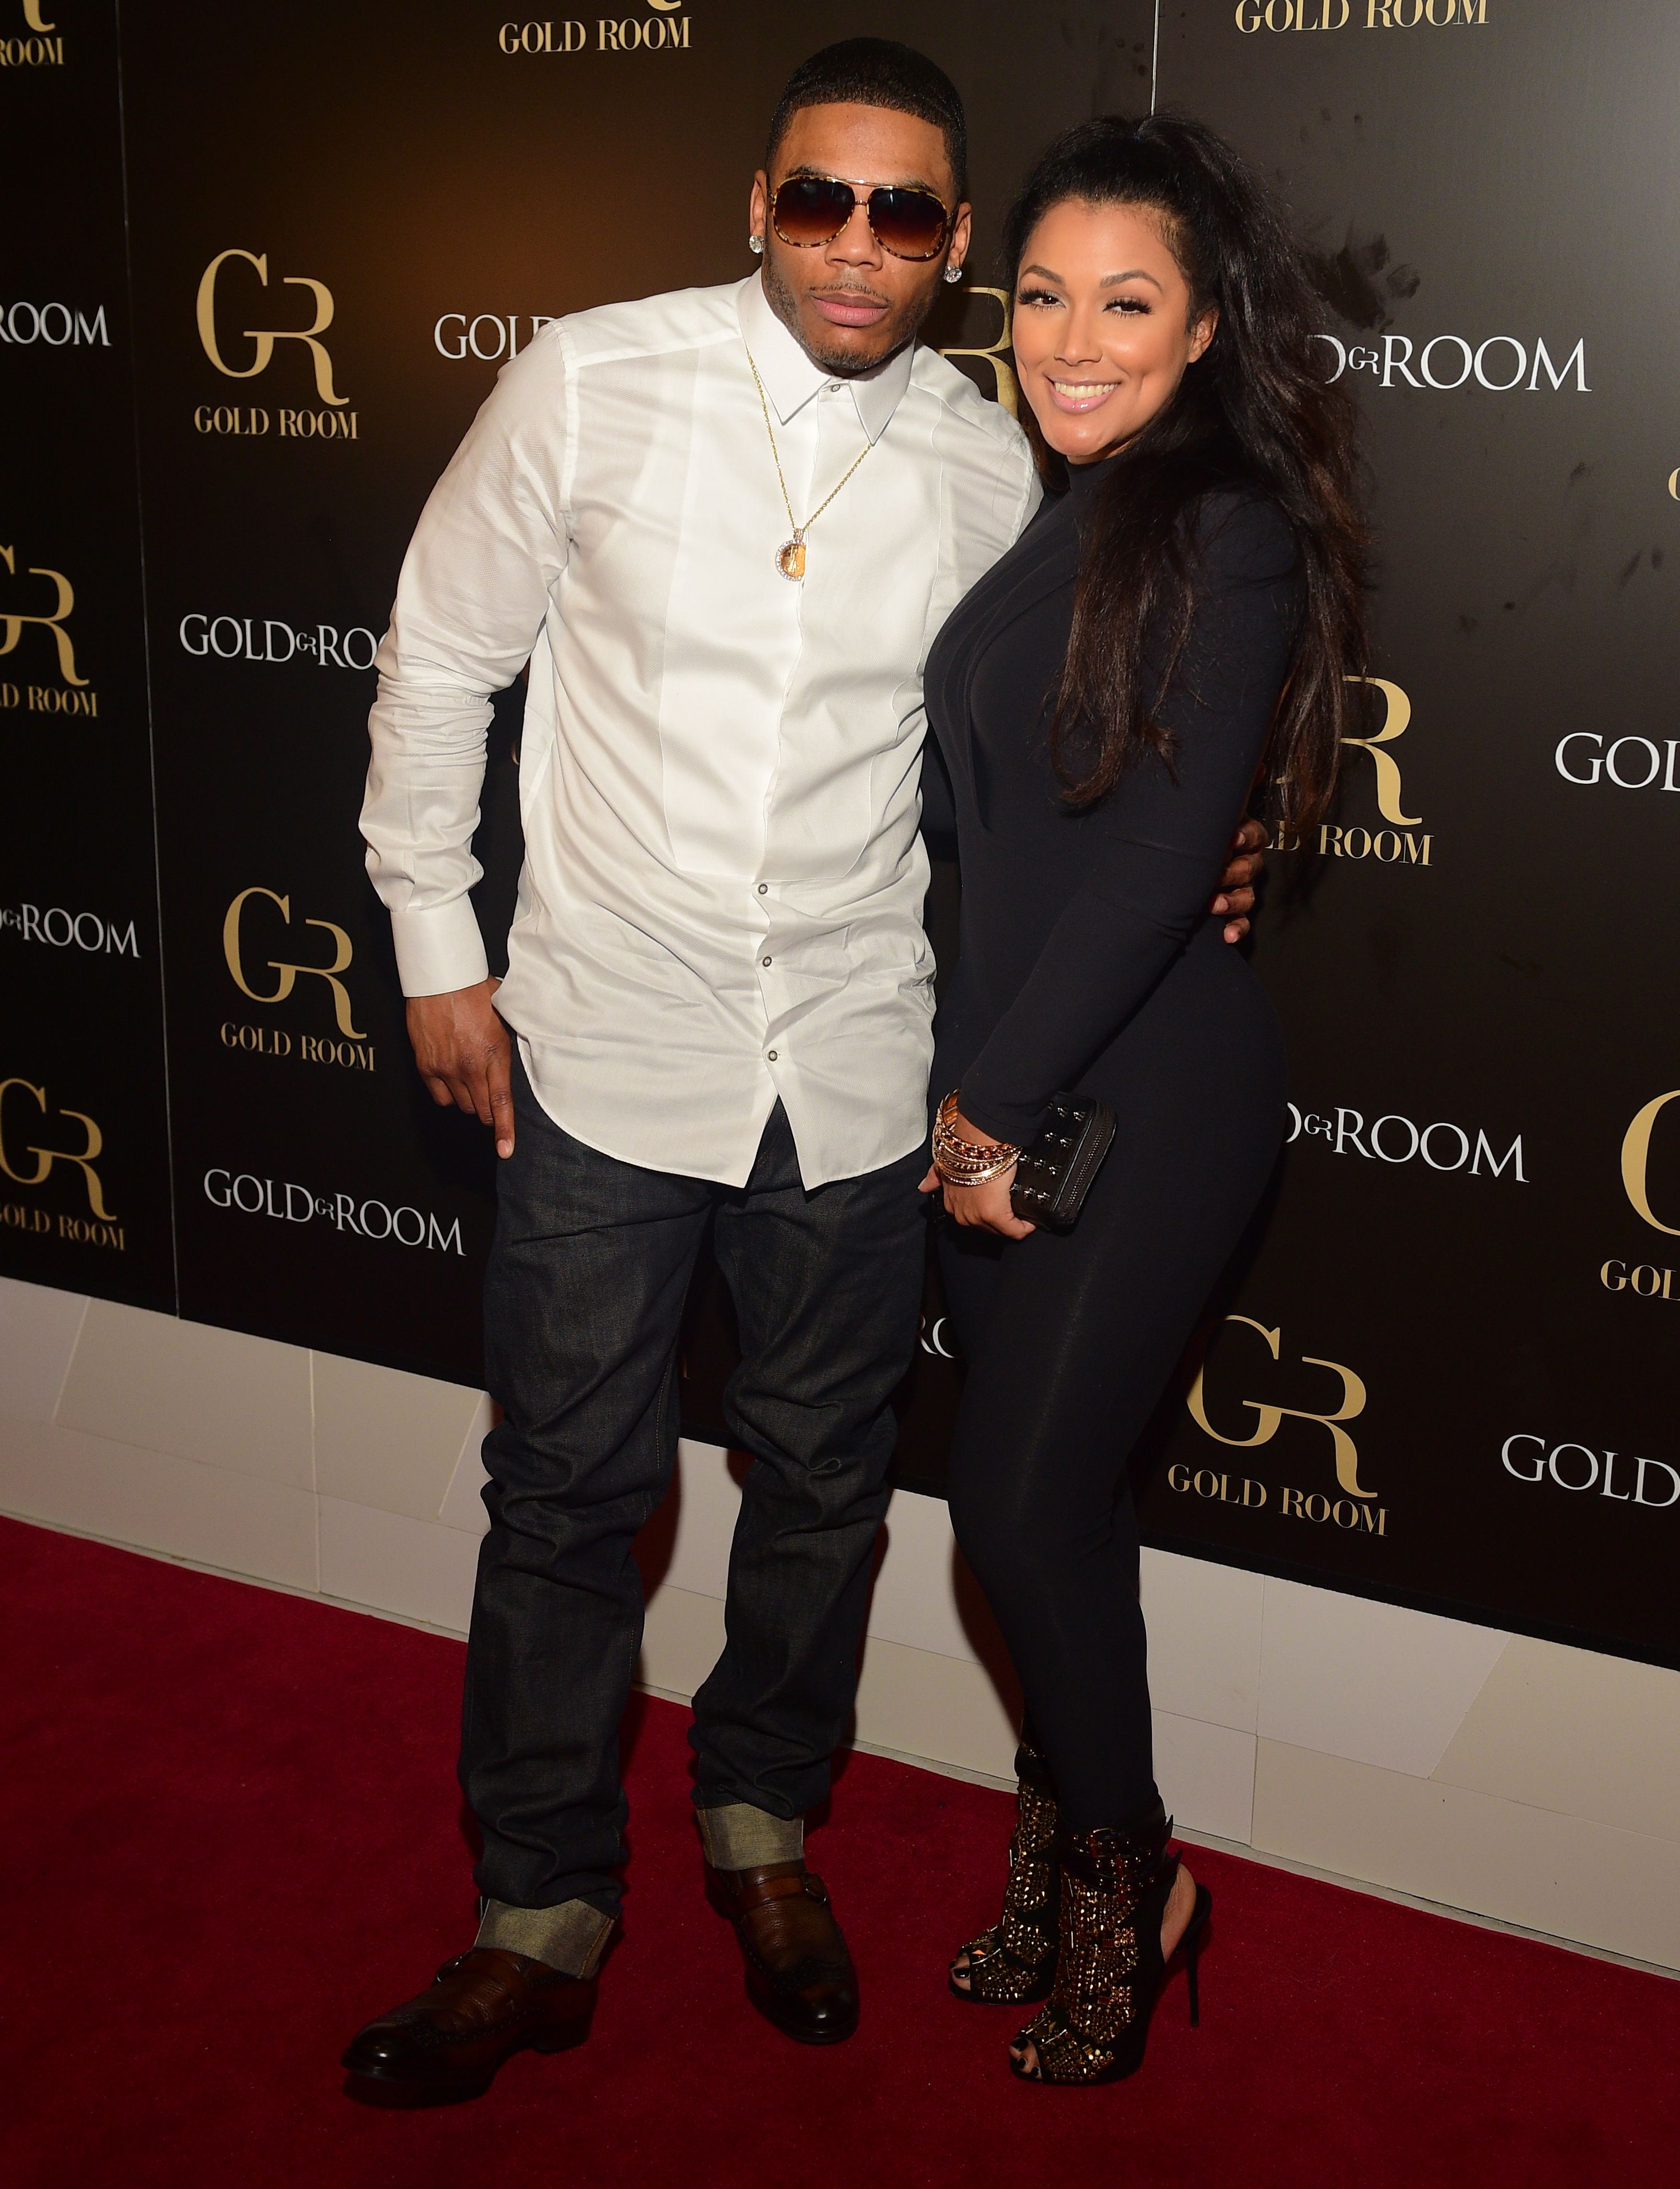 Nelly and Shantel Jackson during Gold Room Monday Nights at Gold Room on September 21, 2014 in Atlanta, Georgia. | Source: Getty Images